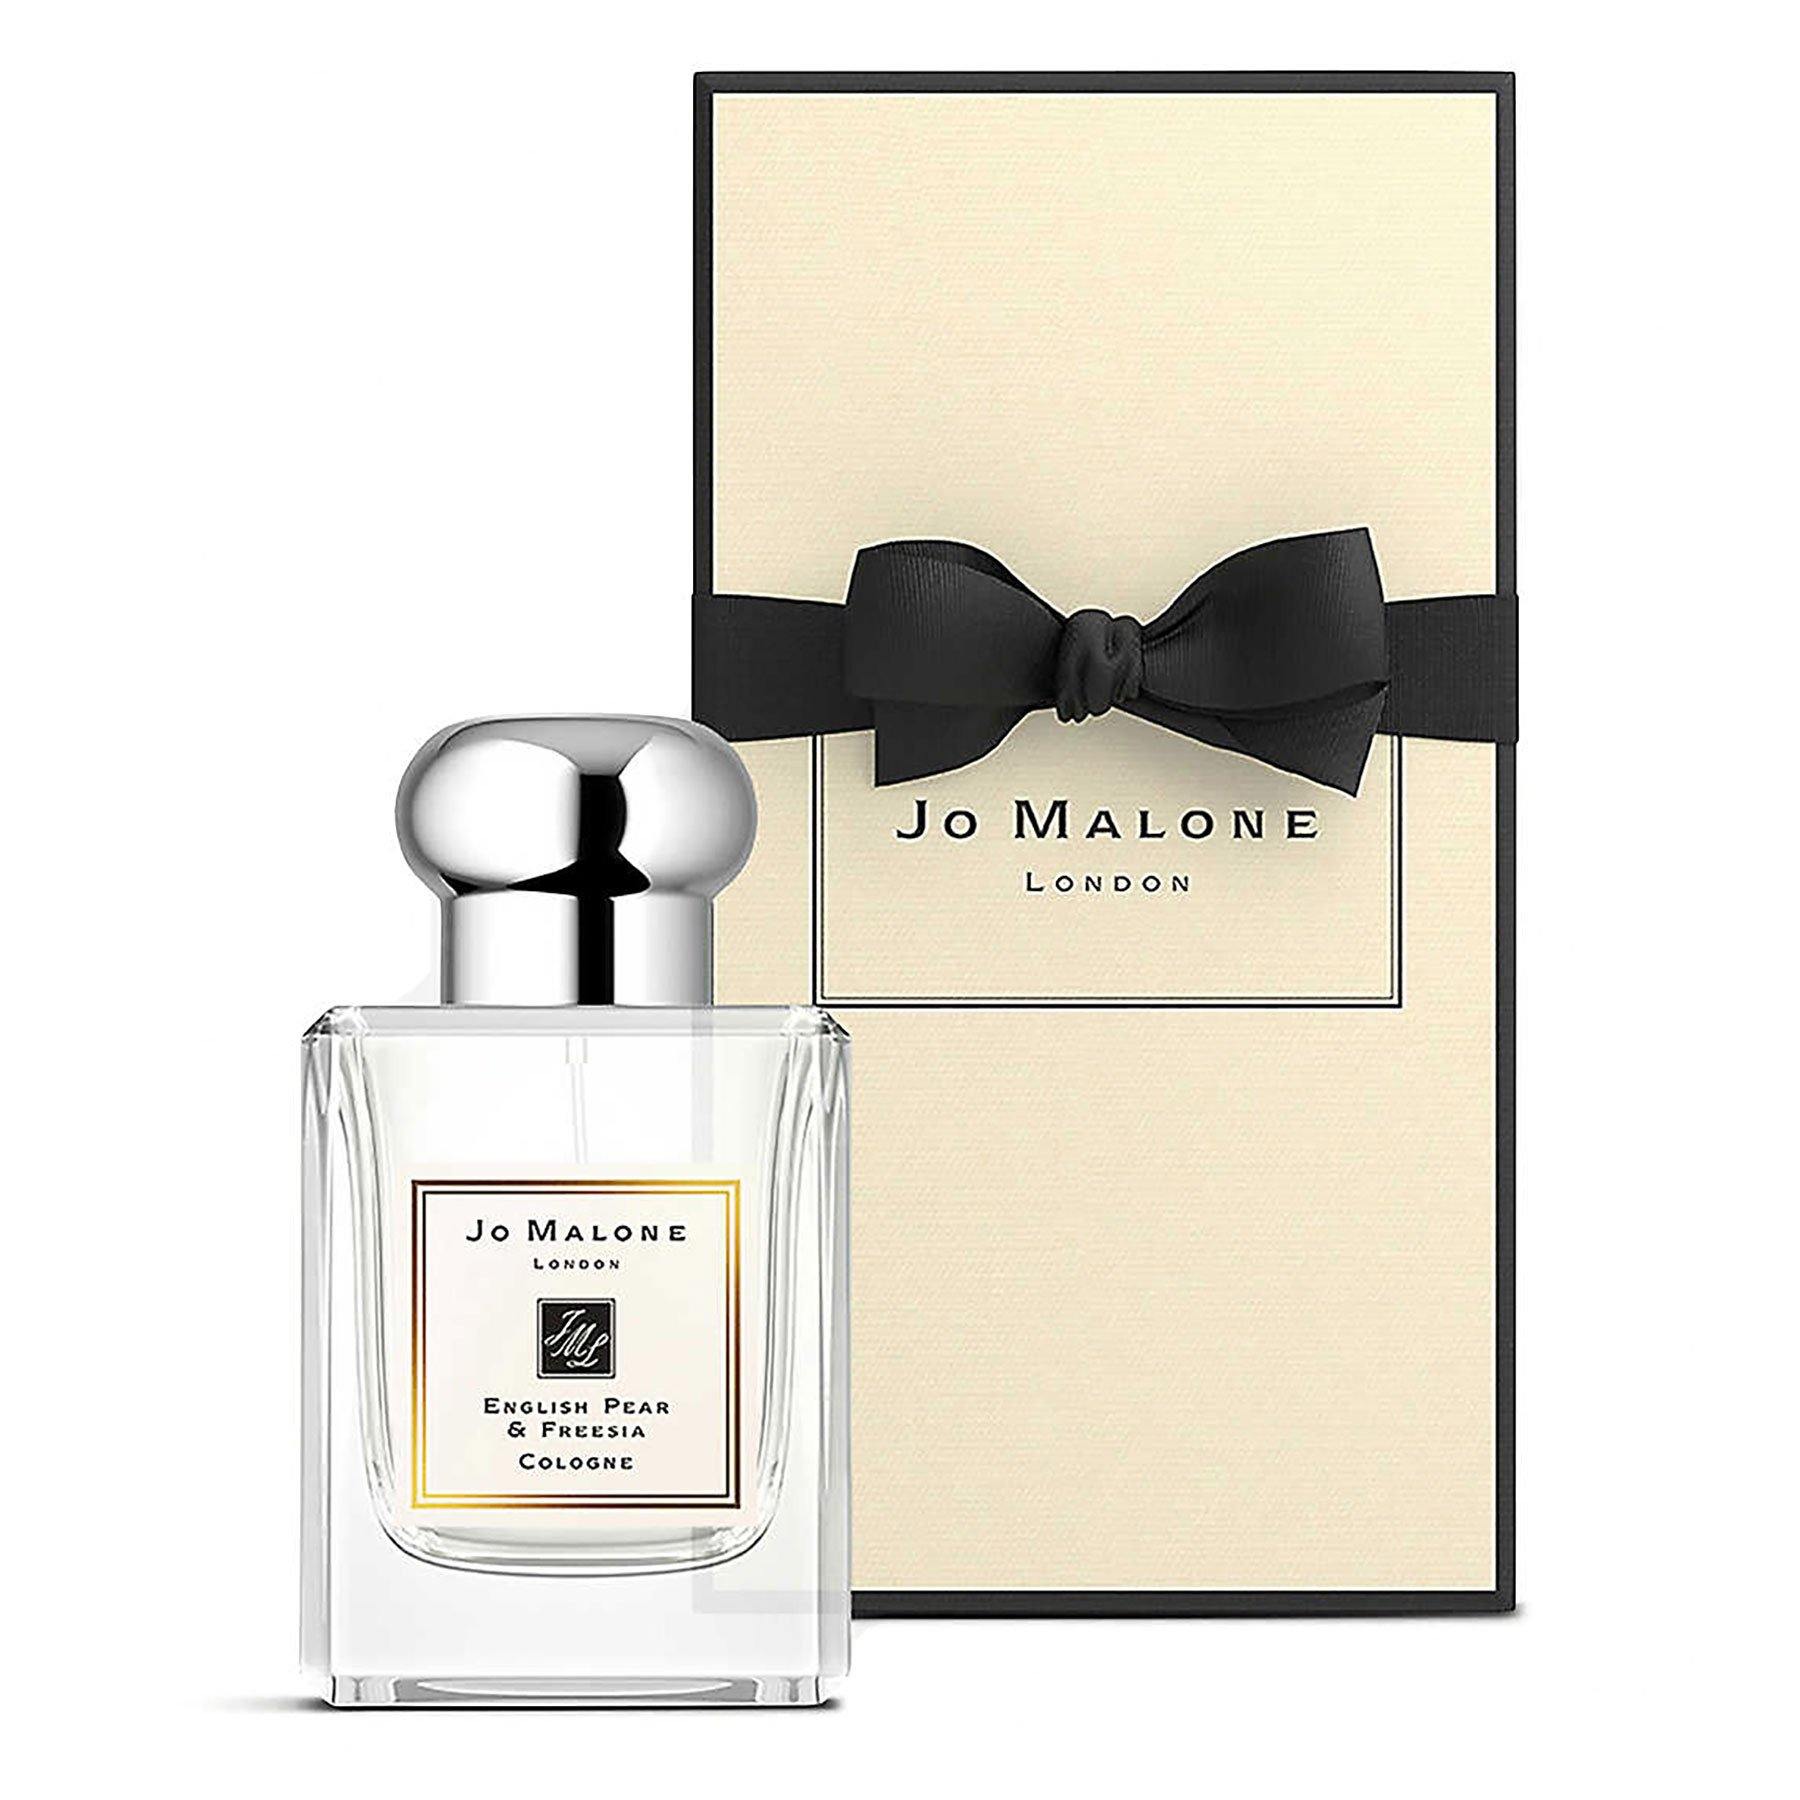 English Pear & Freesia Cologne - Cosmos Boutique New Jersey